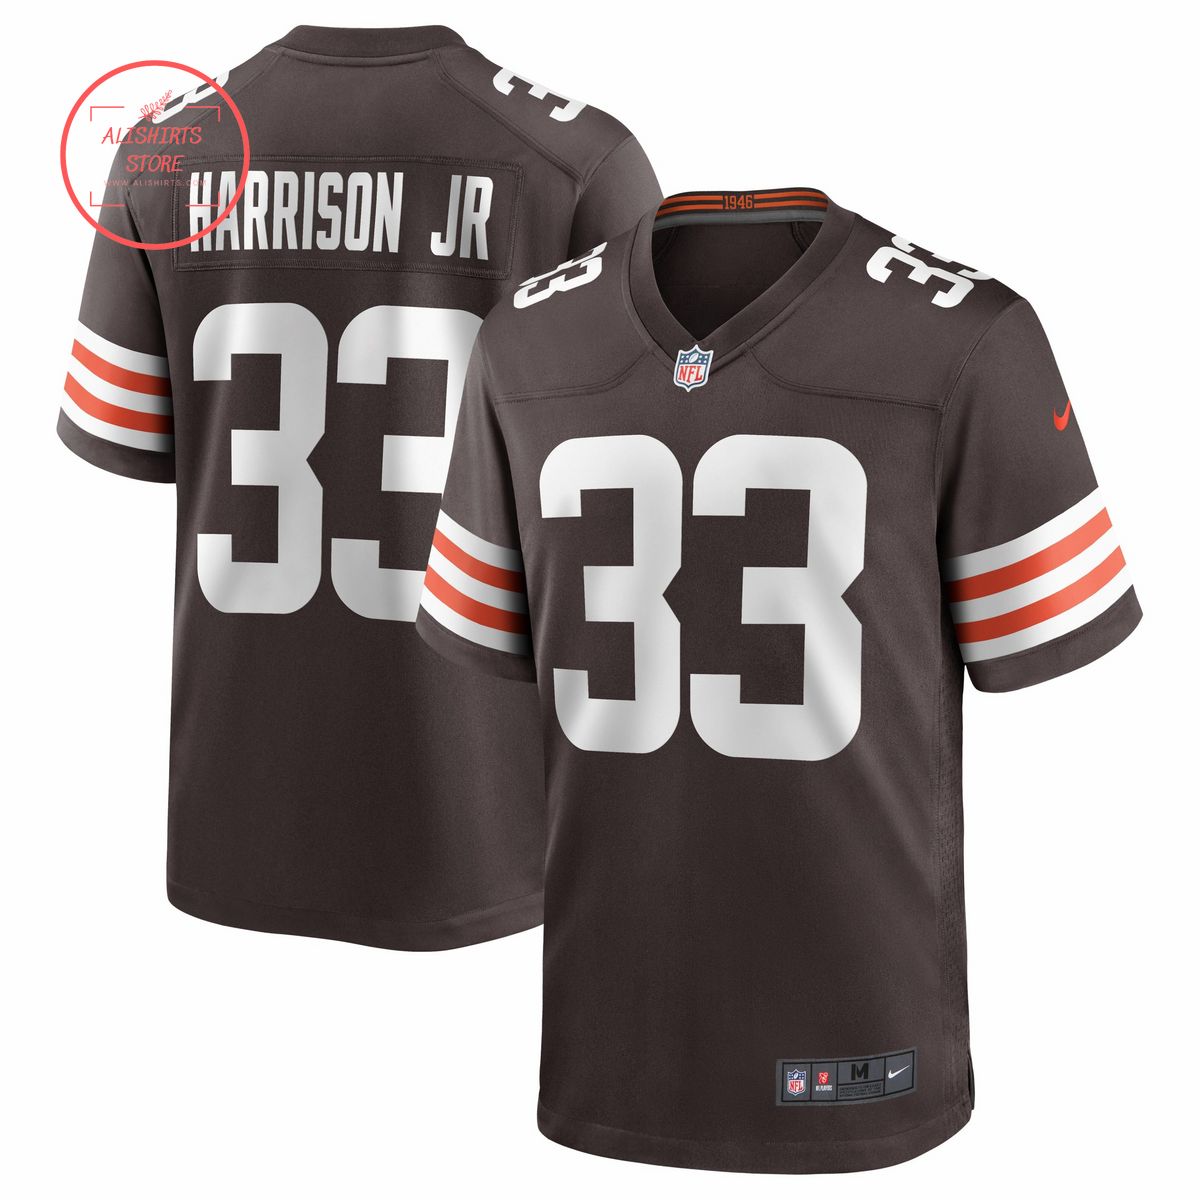 Ronnie Harrison Jr. Cleveland Browns Nike Game Jersey